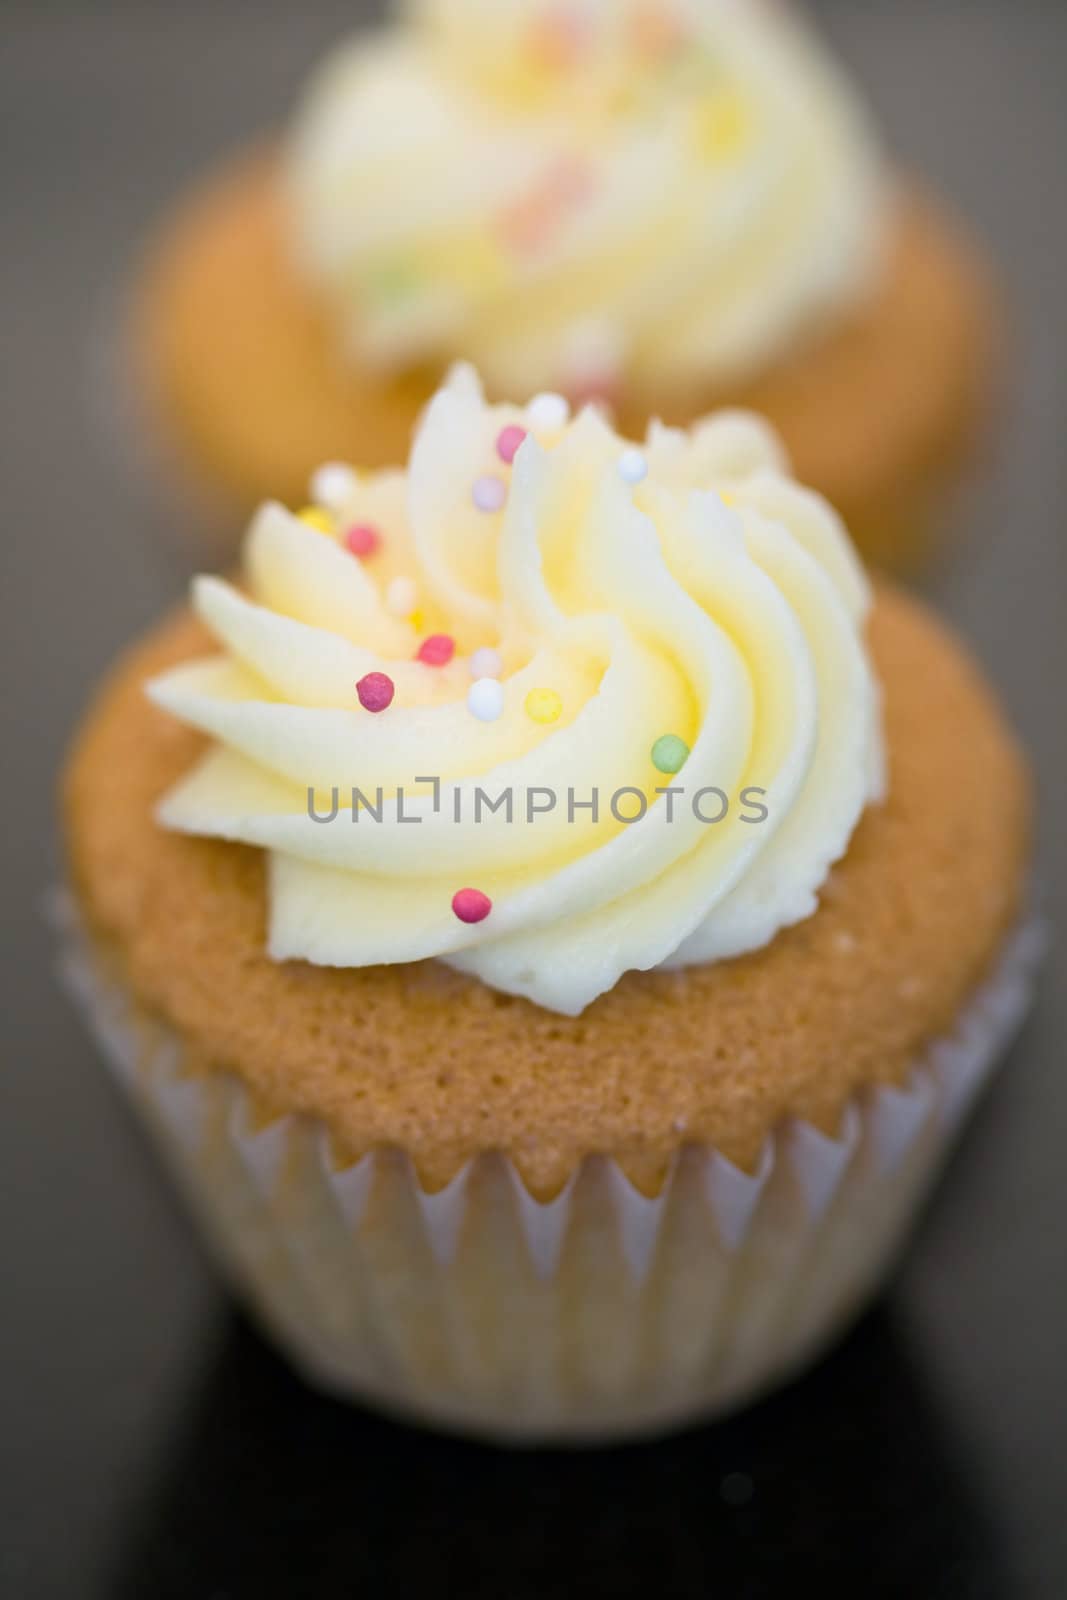 Two cupcakes, shallow depth of field with focus at front